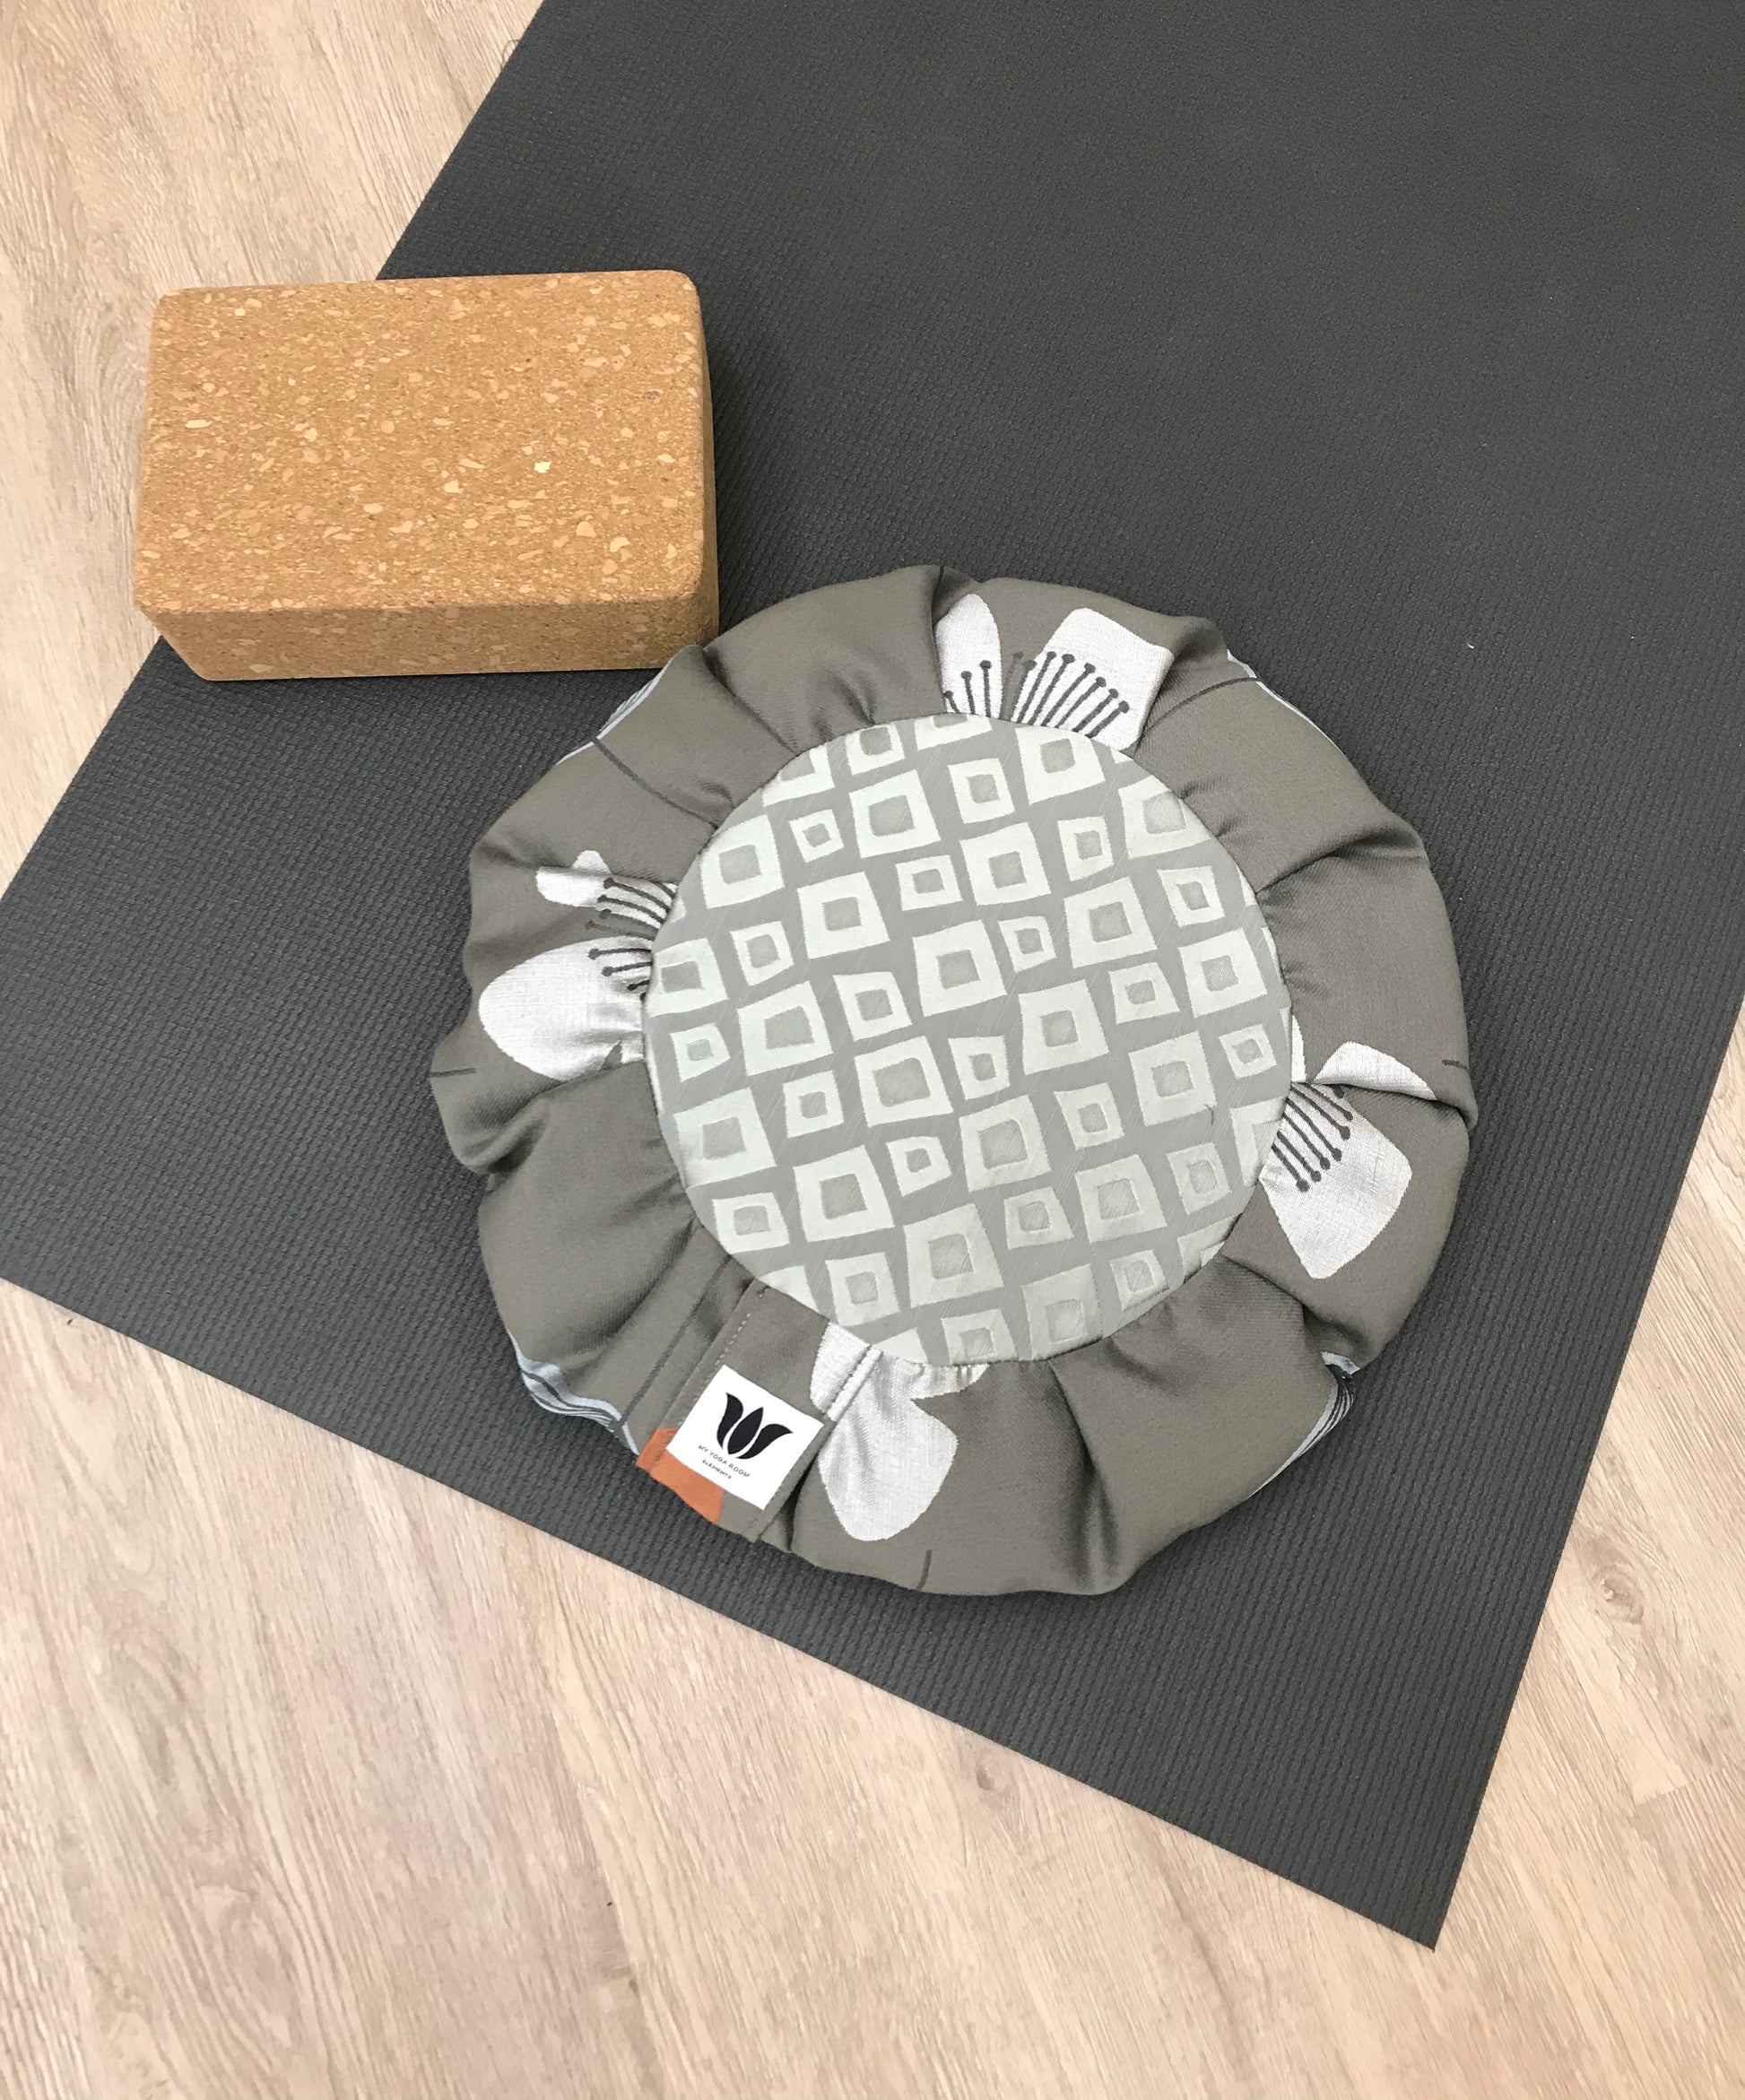 Handcrafted premium home decor fabric meditation seat cushion in rich sage gray green print fabric. Align the spine and body in comfort to calm the monkey mind in your meditation practice. Handcrafted in Calgary, Alberta Canada